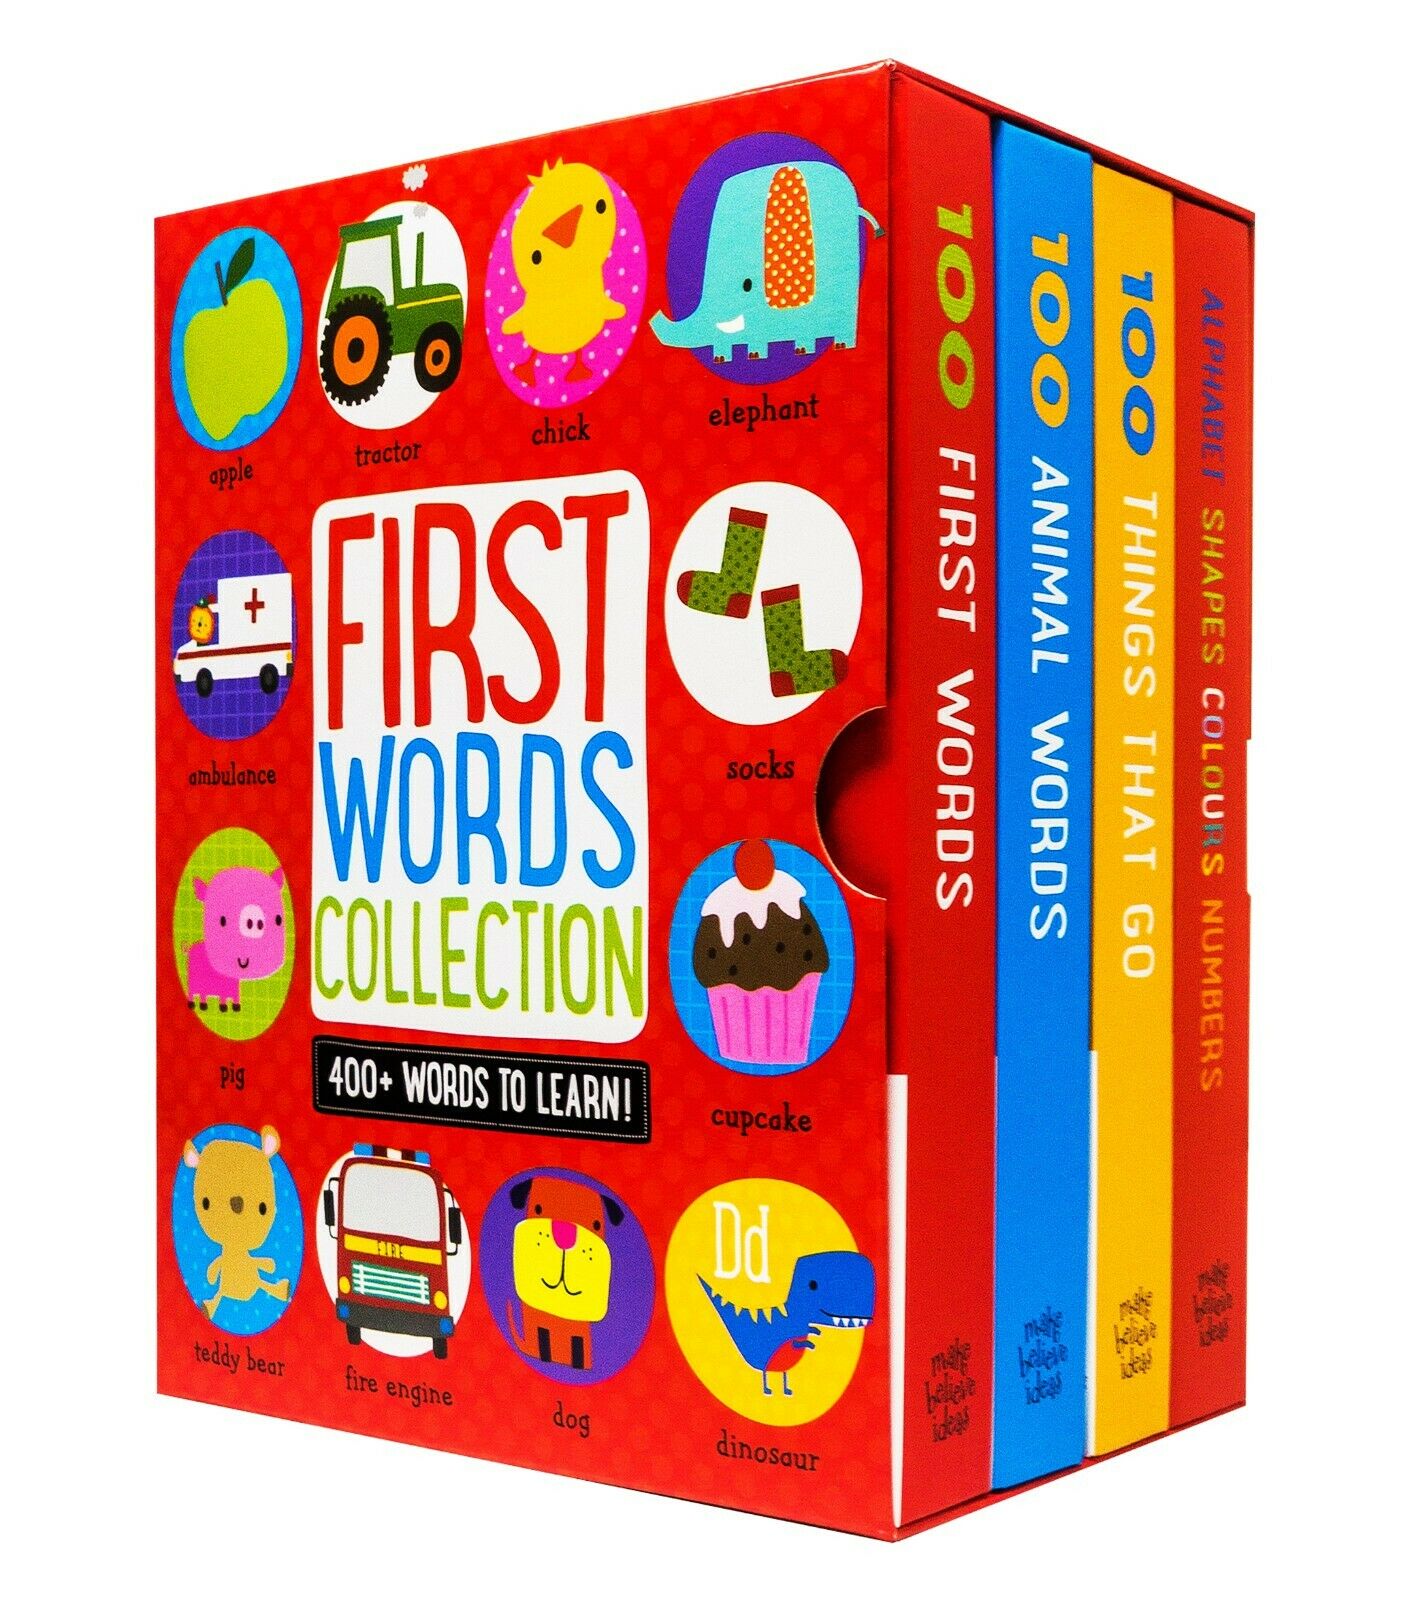 100 Words 4 Board Books Children Collection Set Box Set By Dawn Machell - St Stephens Books